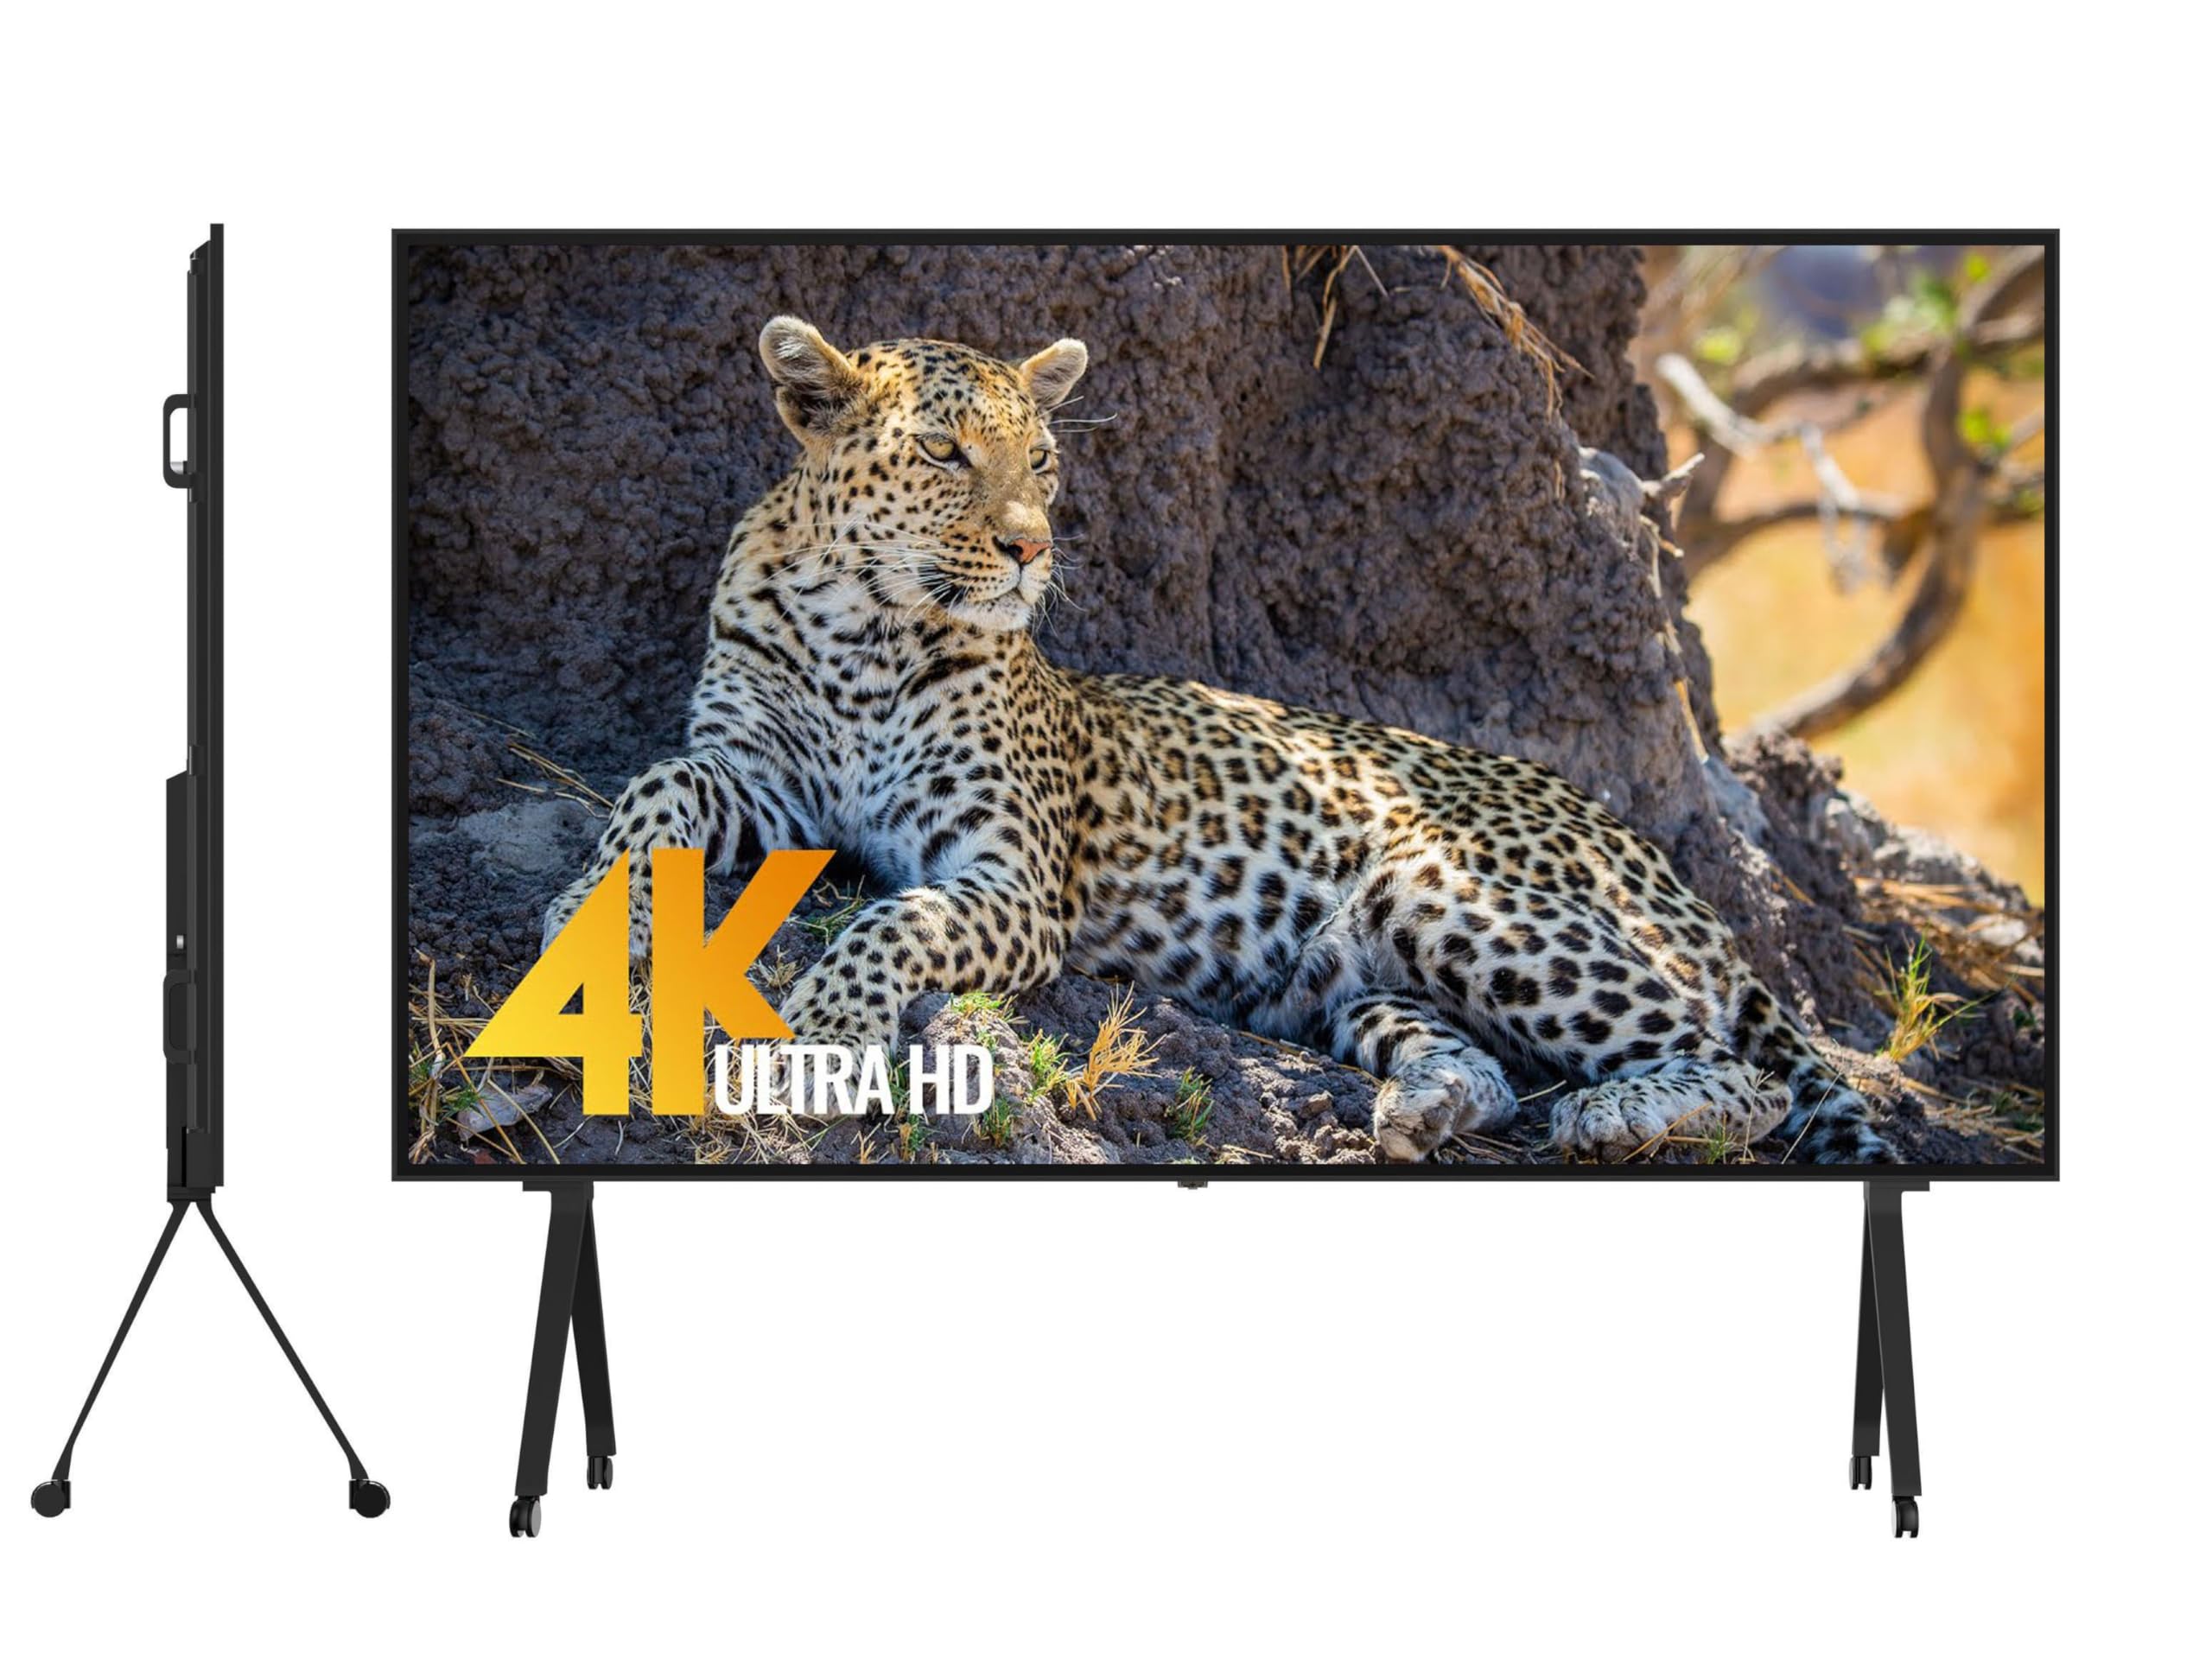 GTUOXIES 98 Inch Mobile Smart TV LED Displays,16:9, TS98D UHD 4K Television with Floor Stand, Wall Mount, Table Base for Home,Business